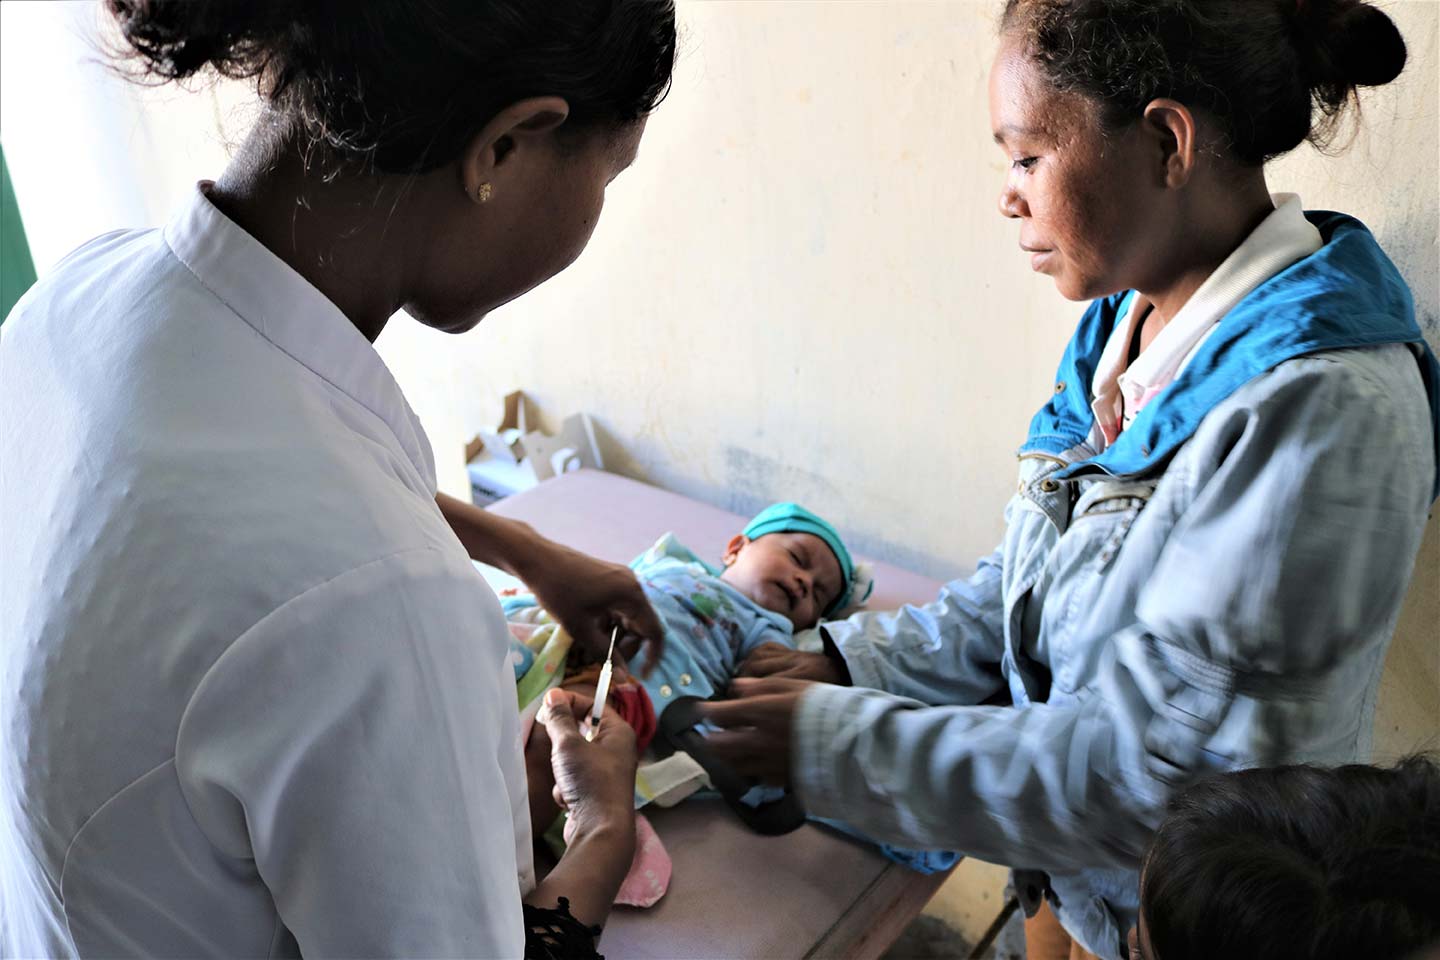 A health worker administers a vaccine to a baby as his mother watches on at the Comoro Community Health Centre in Dili. © UNICEF Timor-Leste/Galvin